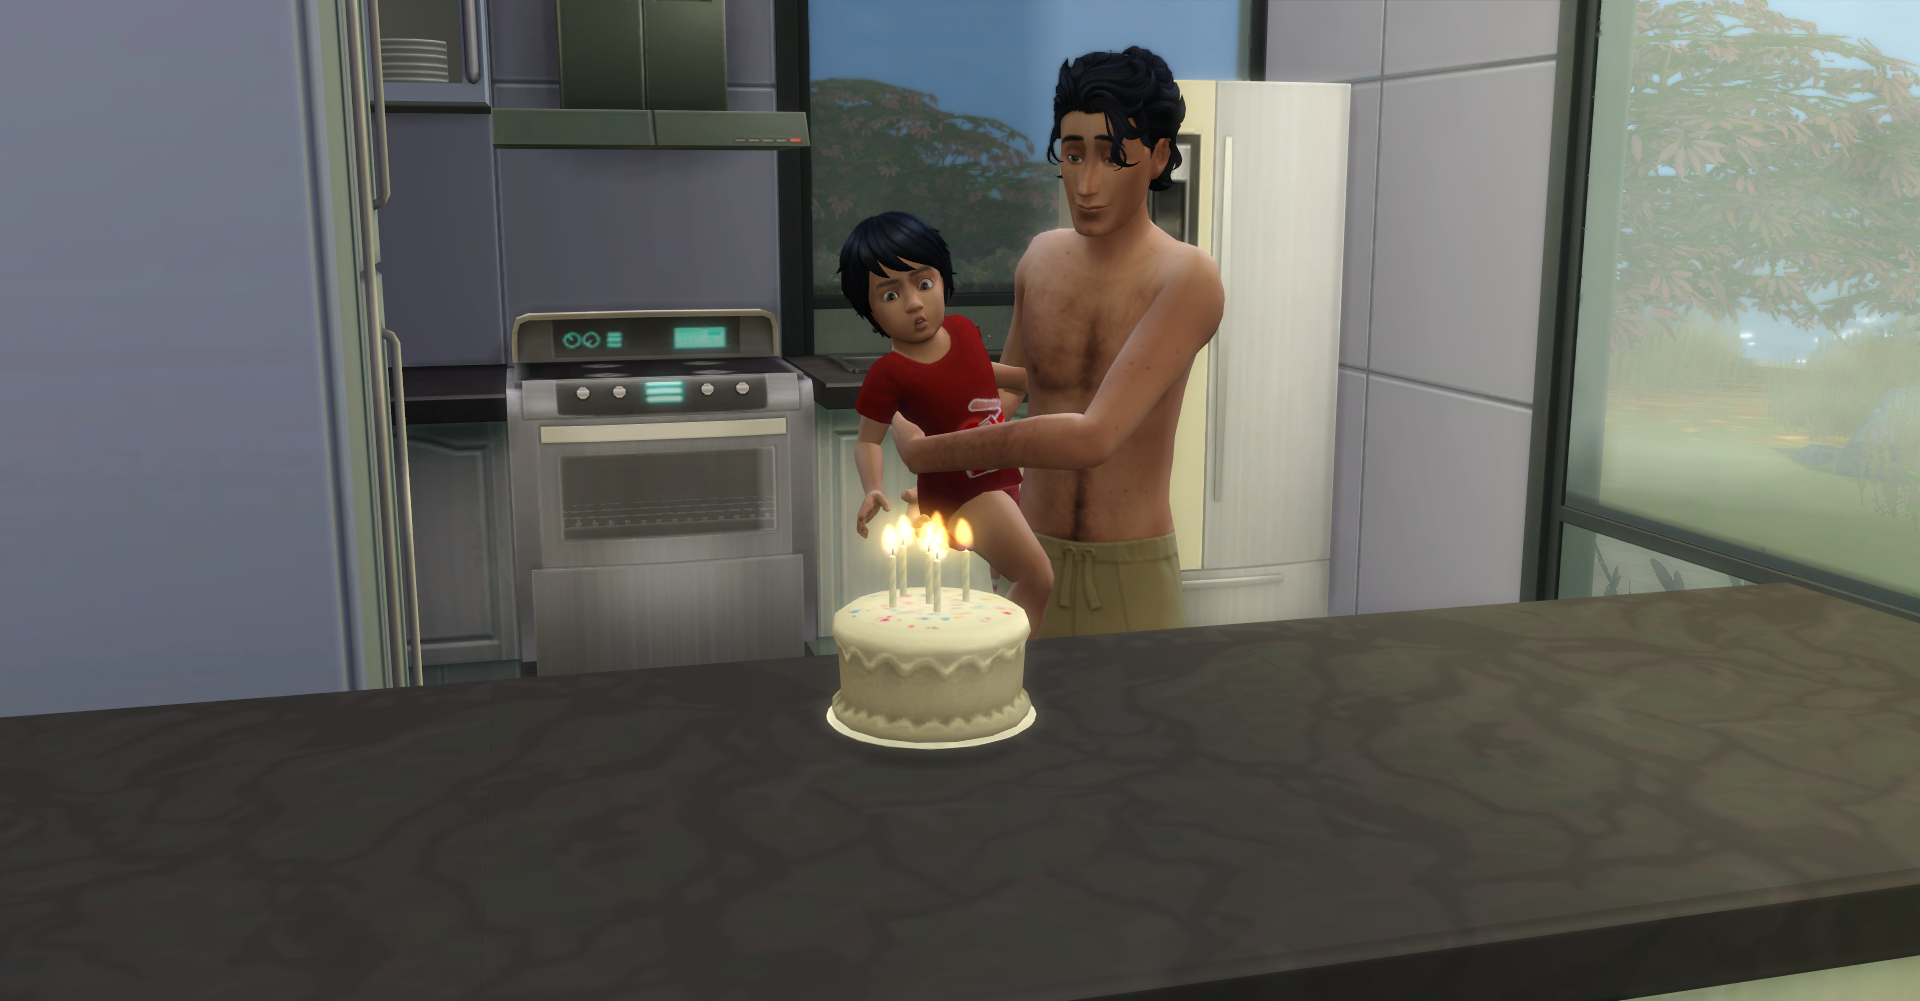 100 baby challenge (masculin) - Page 2 L4lm